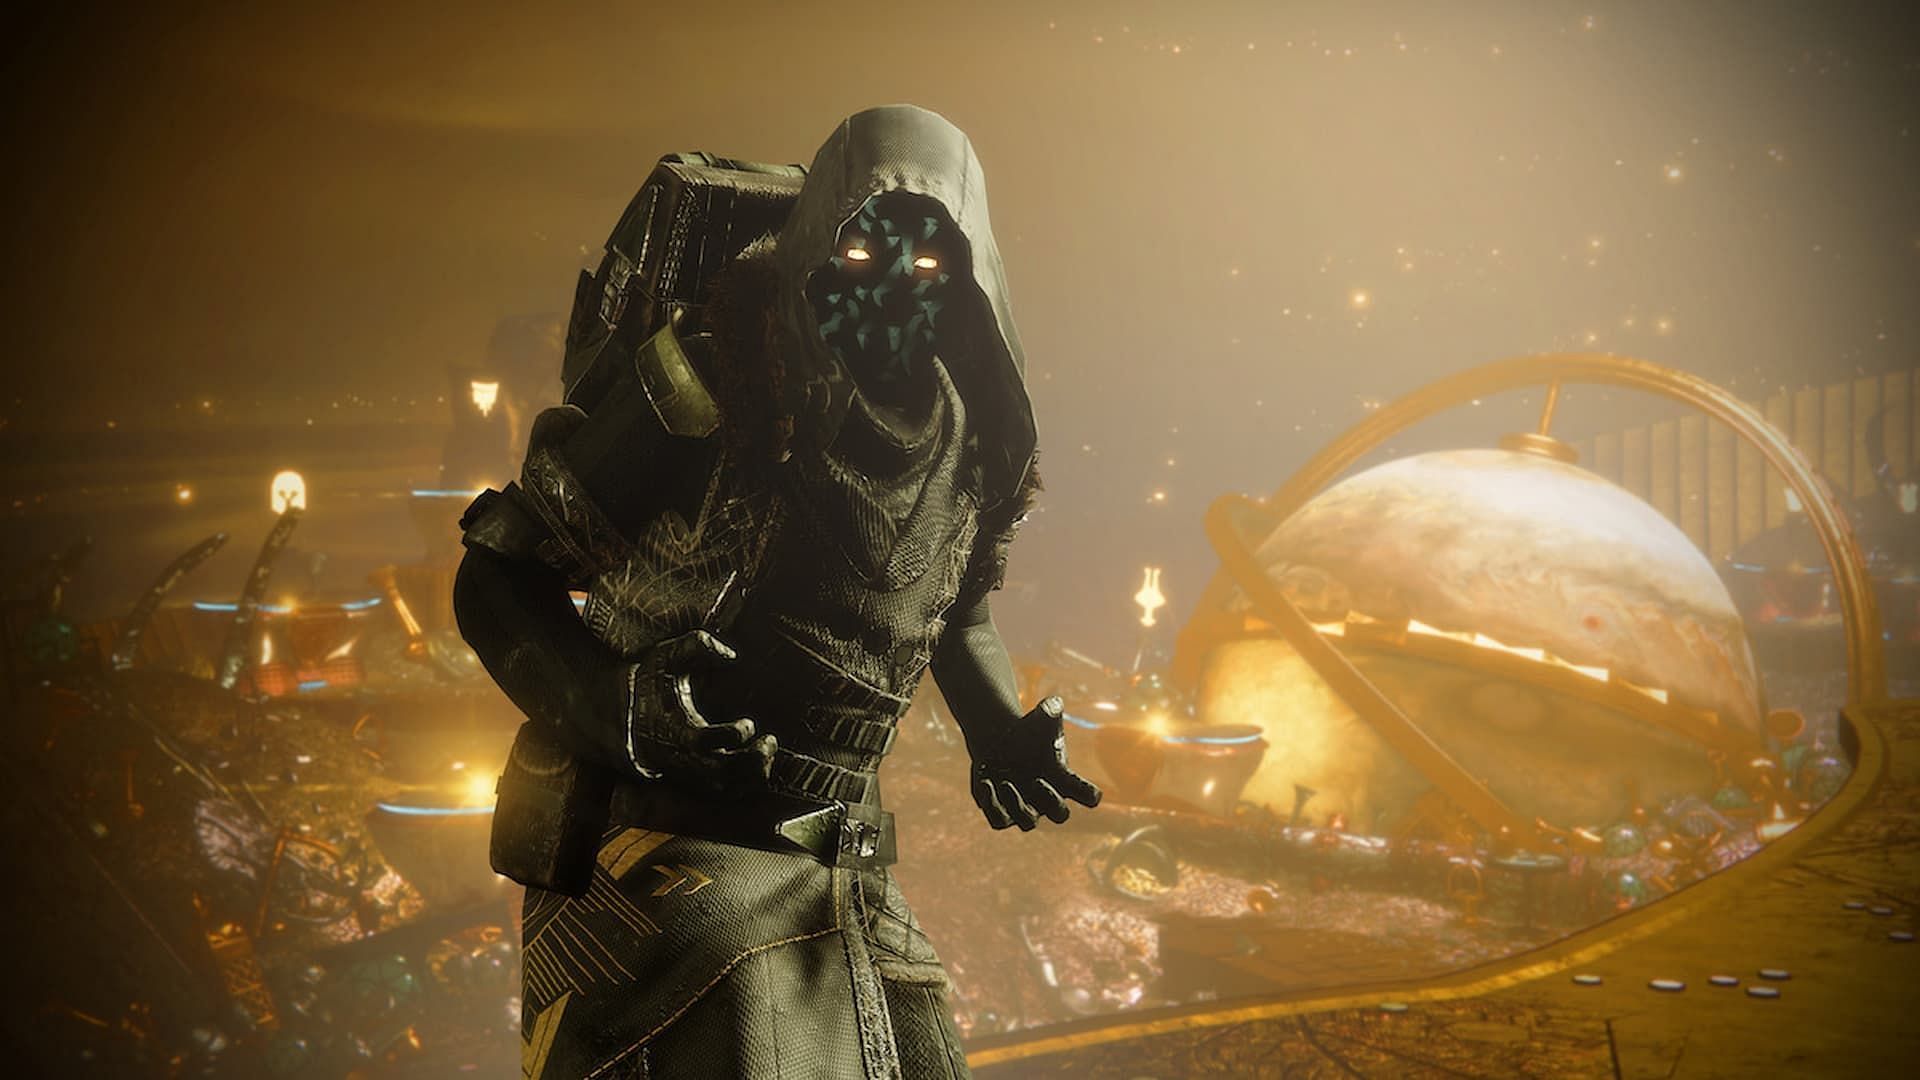 Xur can be found selling some interesting Exotics every weekend in Destiny 2 (Image via Bungie)